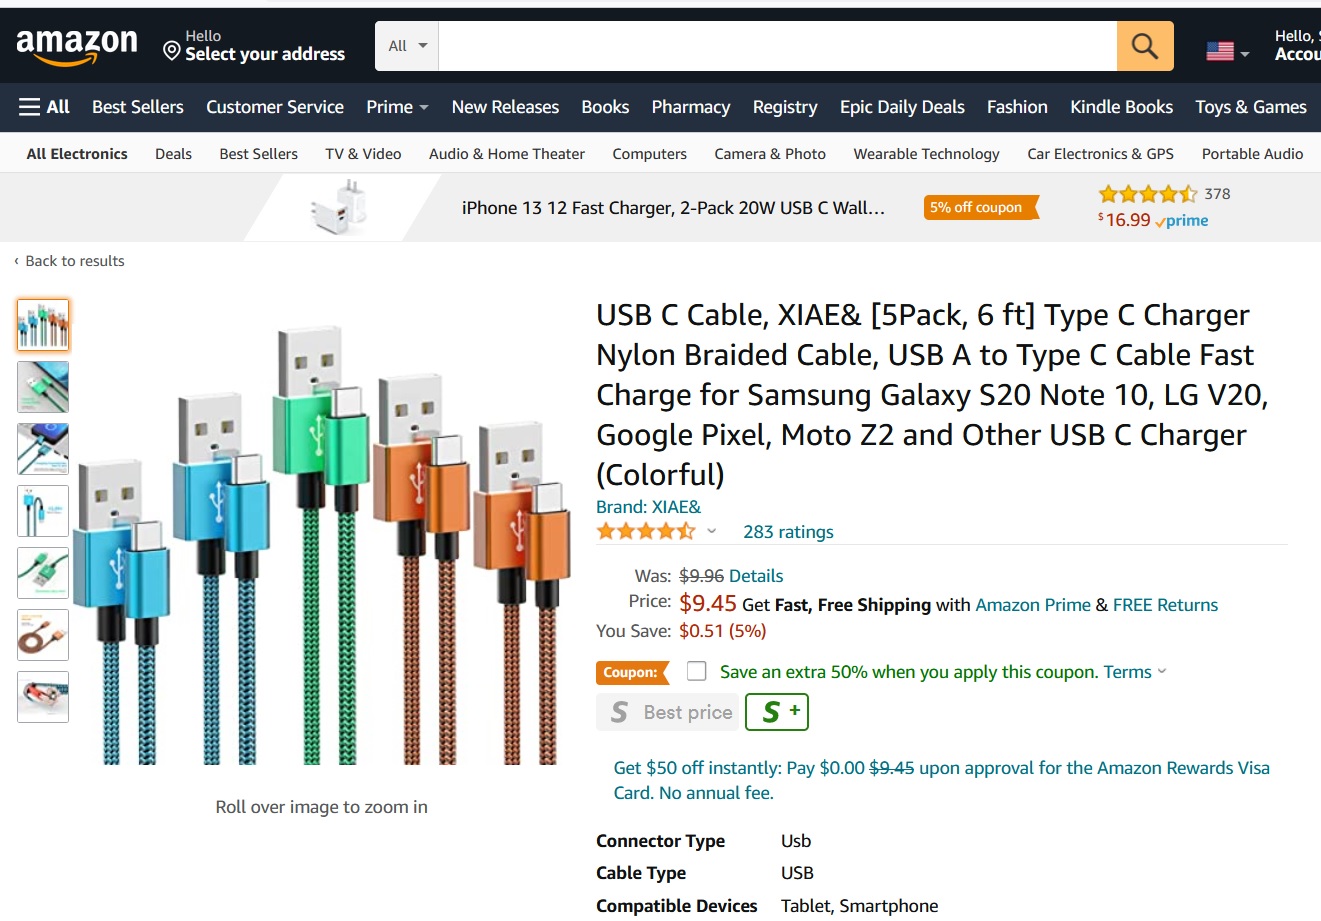 Amazon - USB C Cable - 5 Pack(6 Foot USB A To Type C) $4.73 With 50% Coupon - Free Prime Shipping or Purchase $25